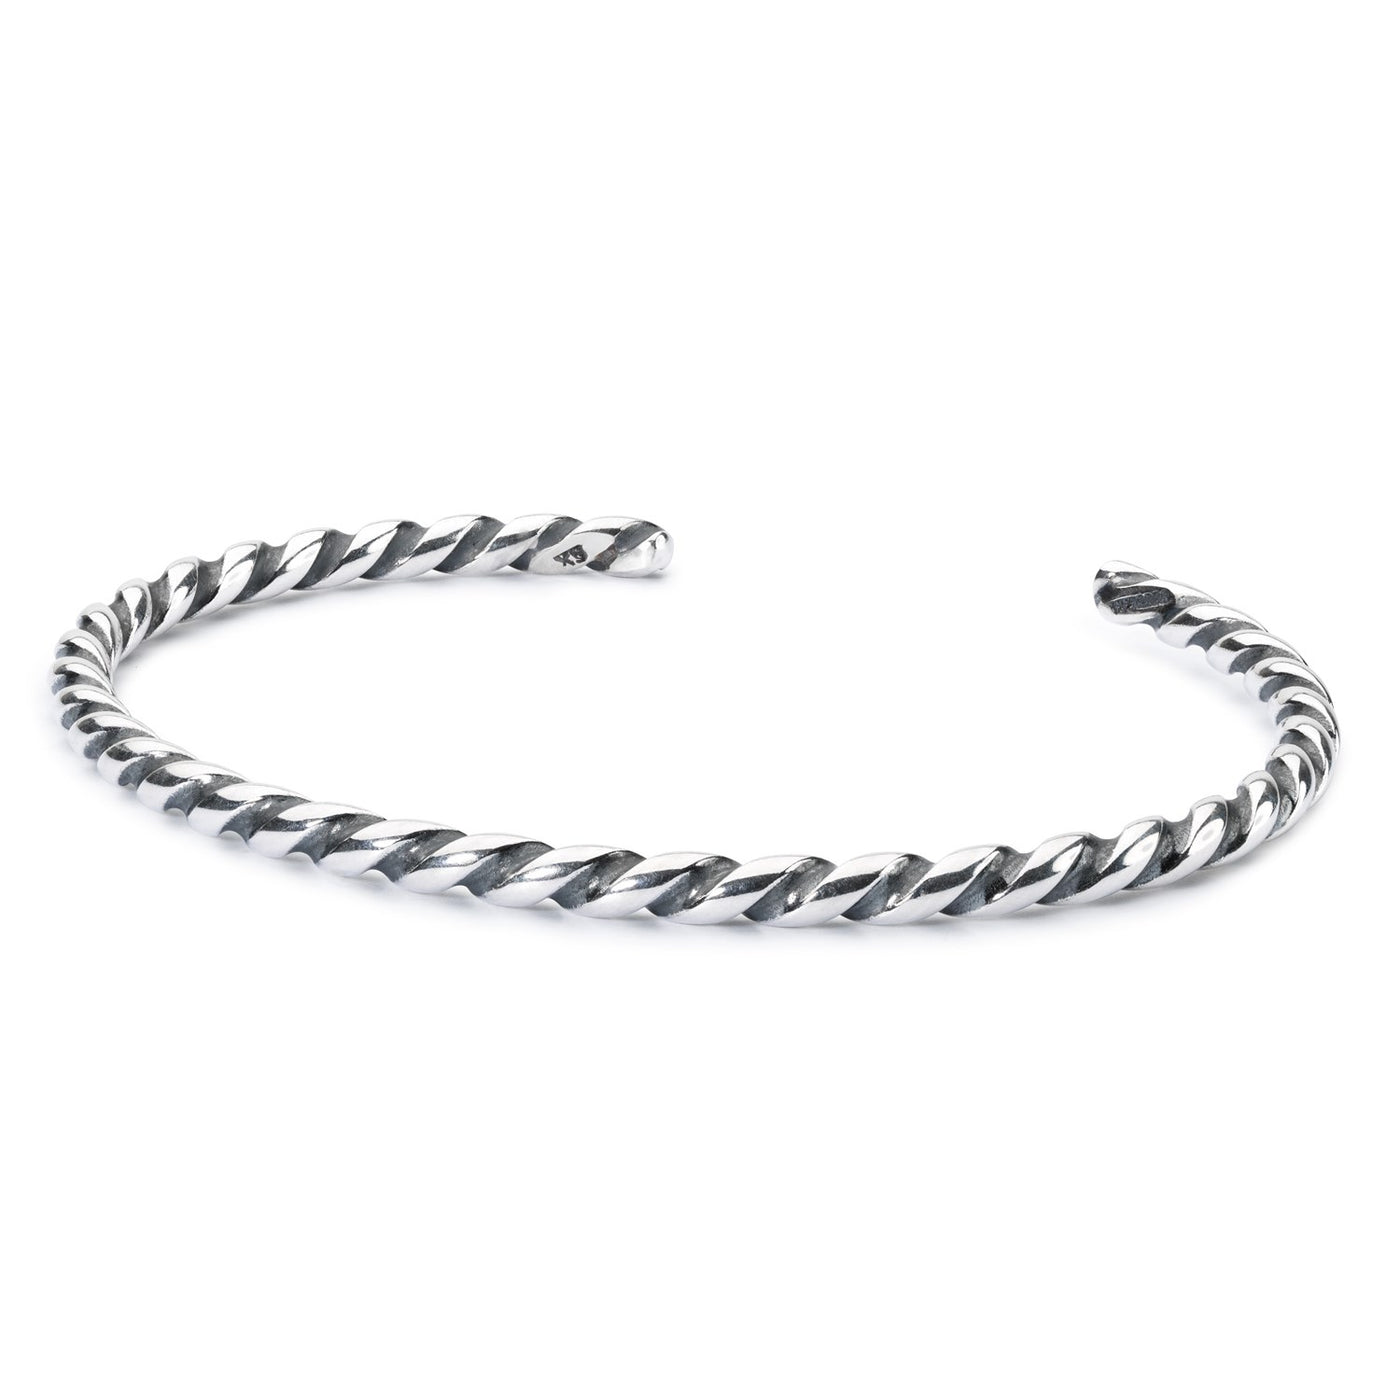 Twisted sterling silver bangle, adding a unique and stylish touch to your Trollbeads bracelet.